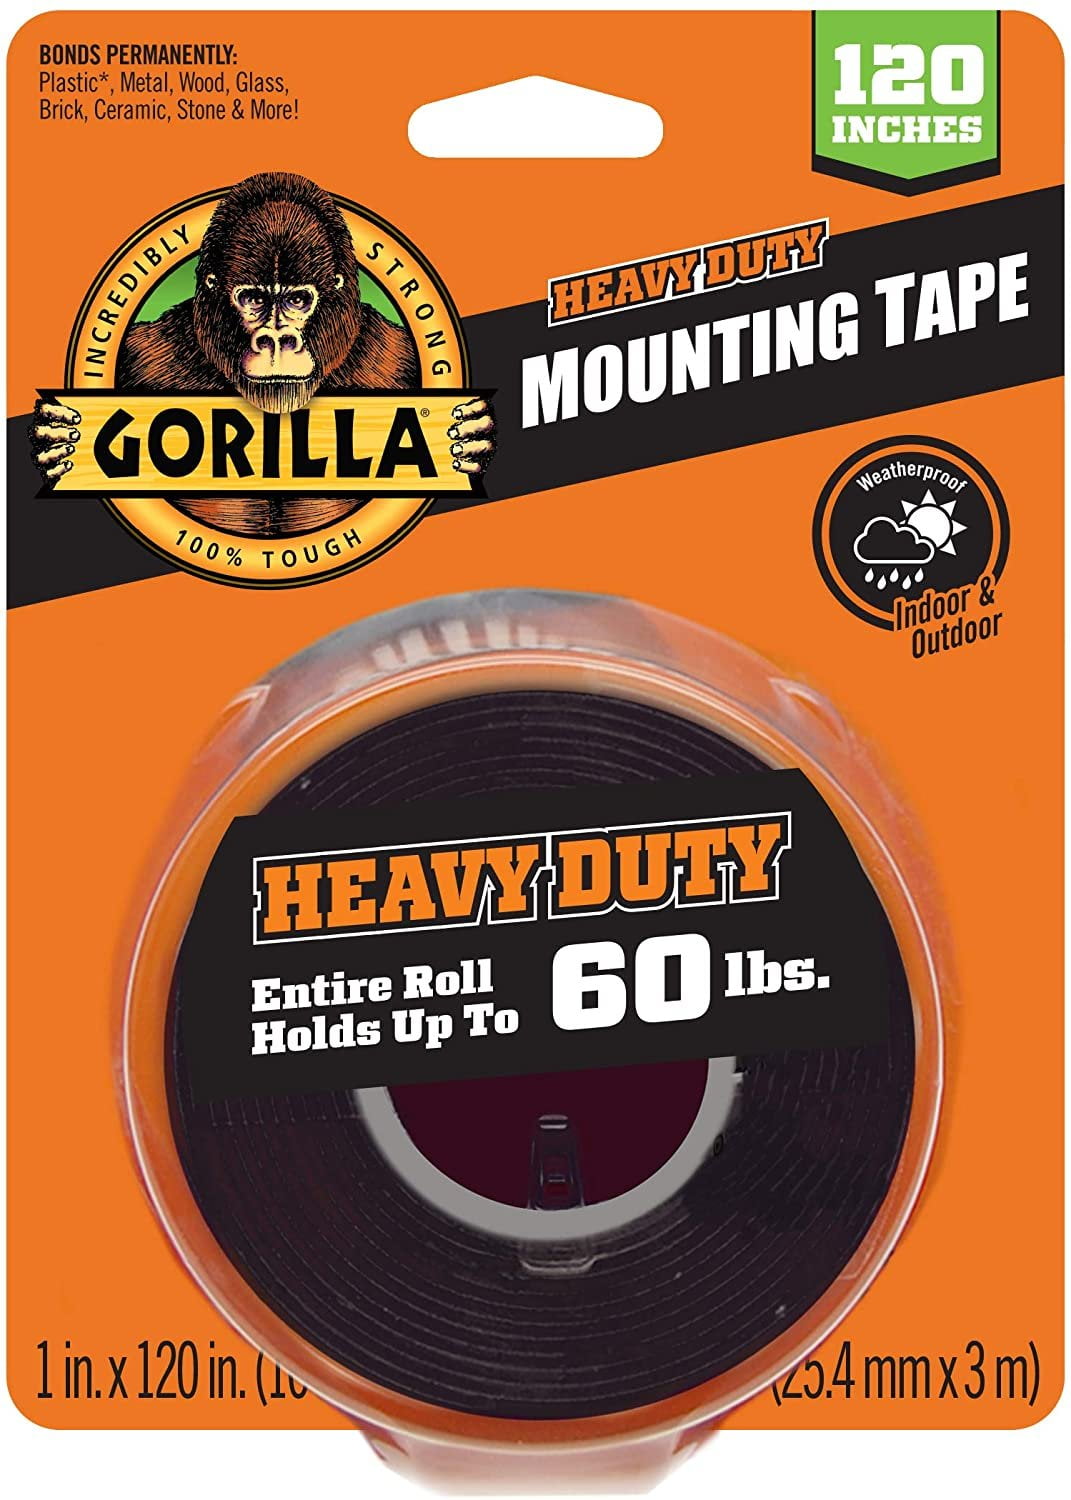  BEILAEEA Double Sided Tape Heavy Duty, Extra Large